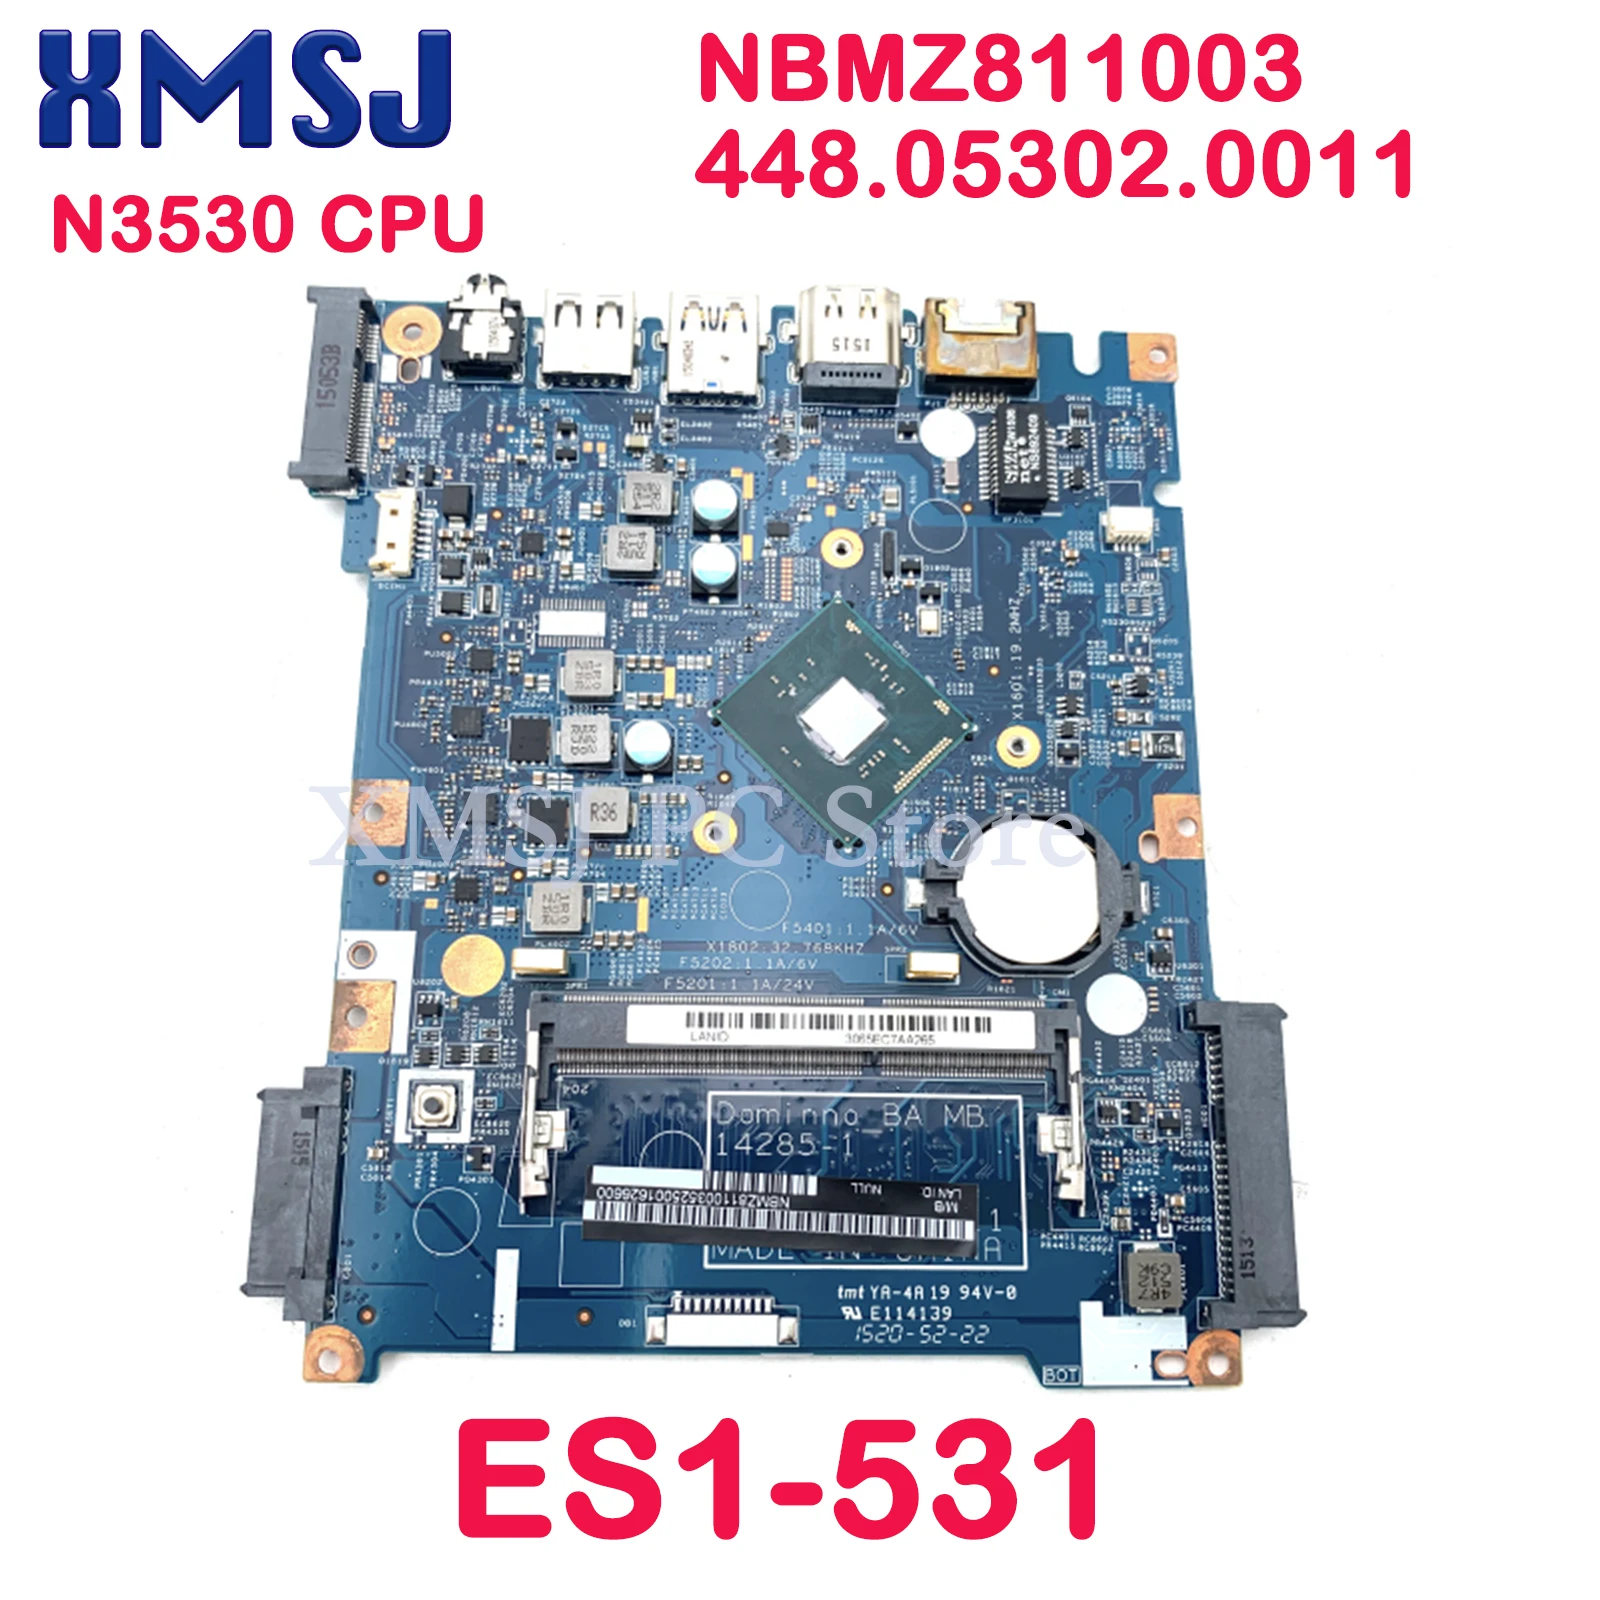 

XMSJ For ACER Aspire ES1-531 Laptop Motherboard NBMZ811003 448.05302.0011 N3530 CPU Onboard DDR3 Main Board Full Test